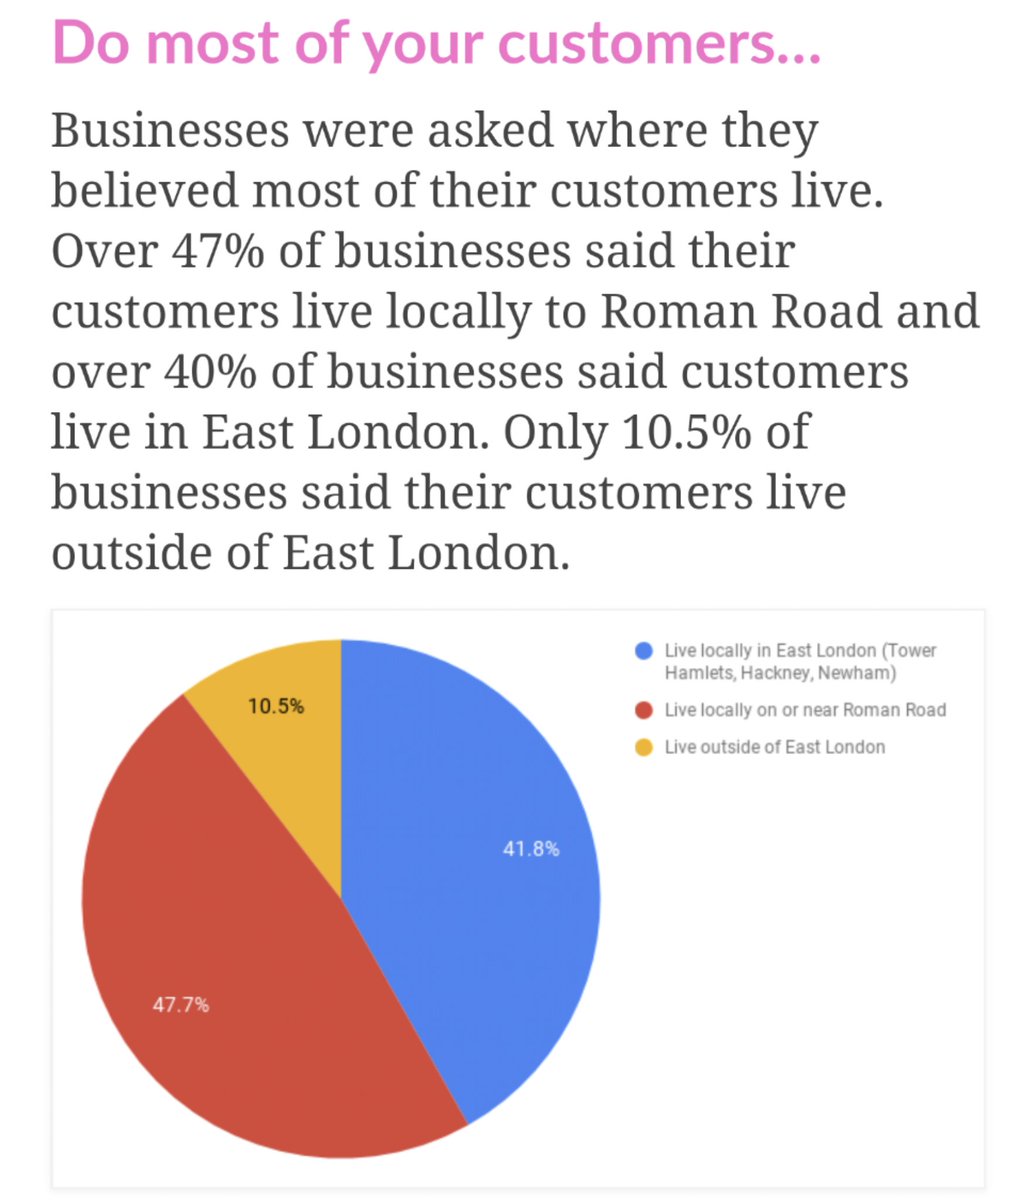 Still concerned about lack of kerbside parking? 48% of R. Rd firms say their customers live v. close (R Rd Trust). Encouraging people to drive in from a wider radius'd just jam up our streets even more. With the best will in the world, where'd they park? Even now? 